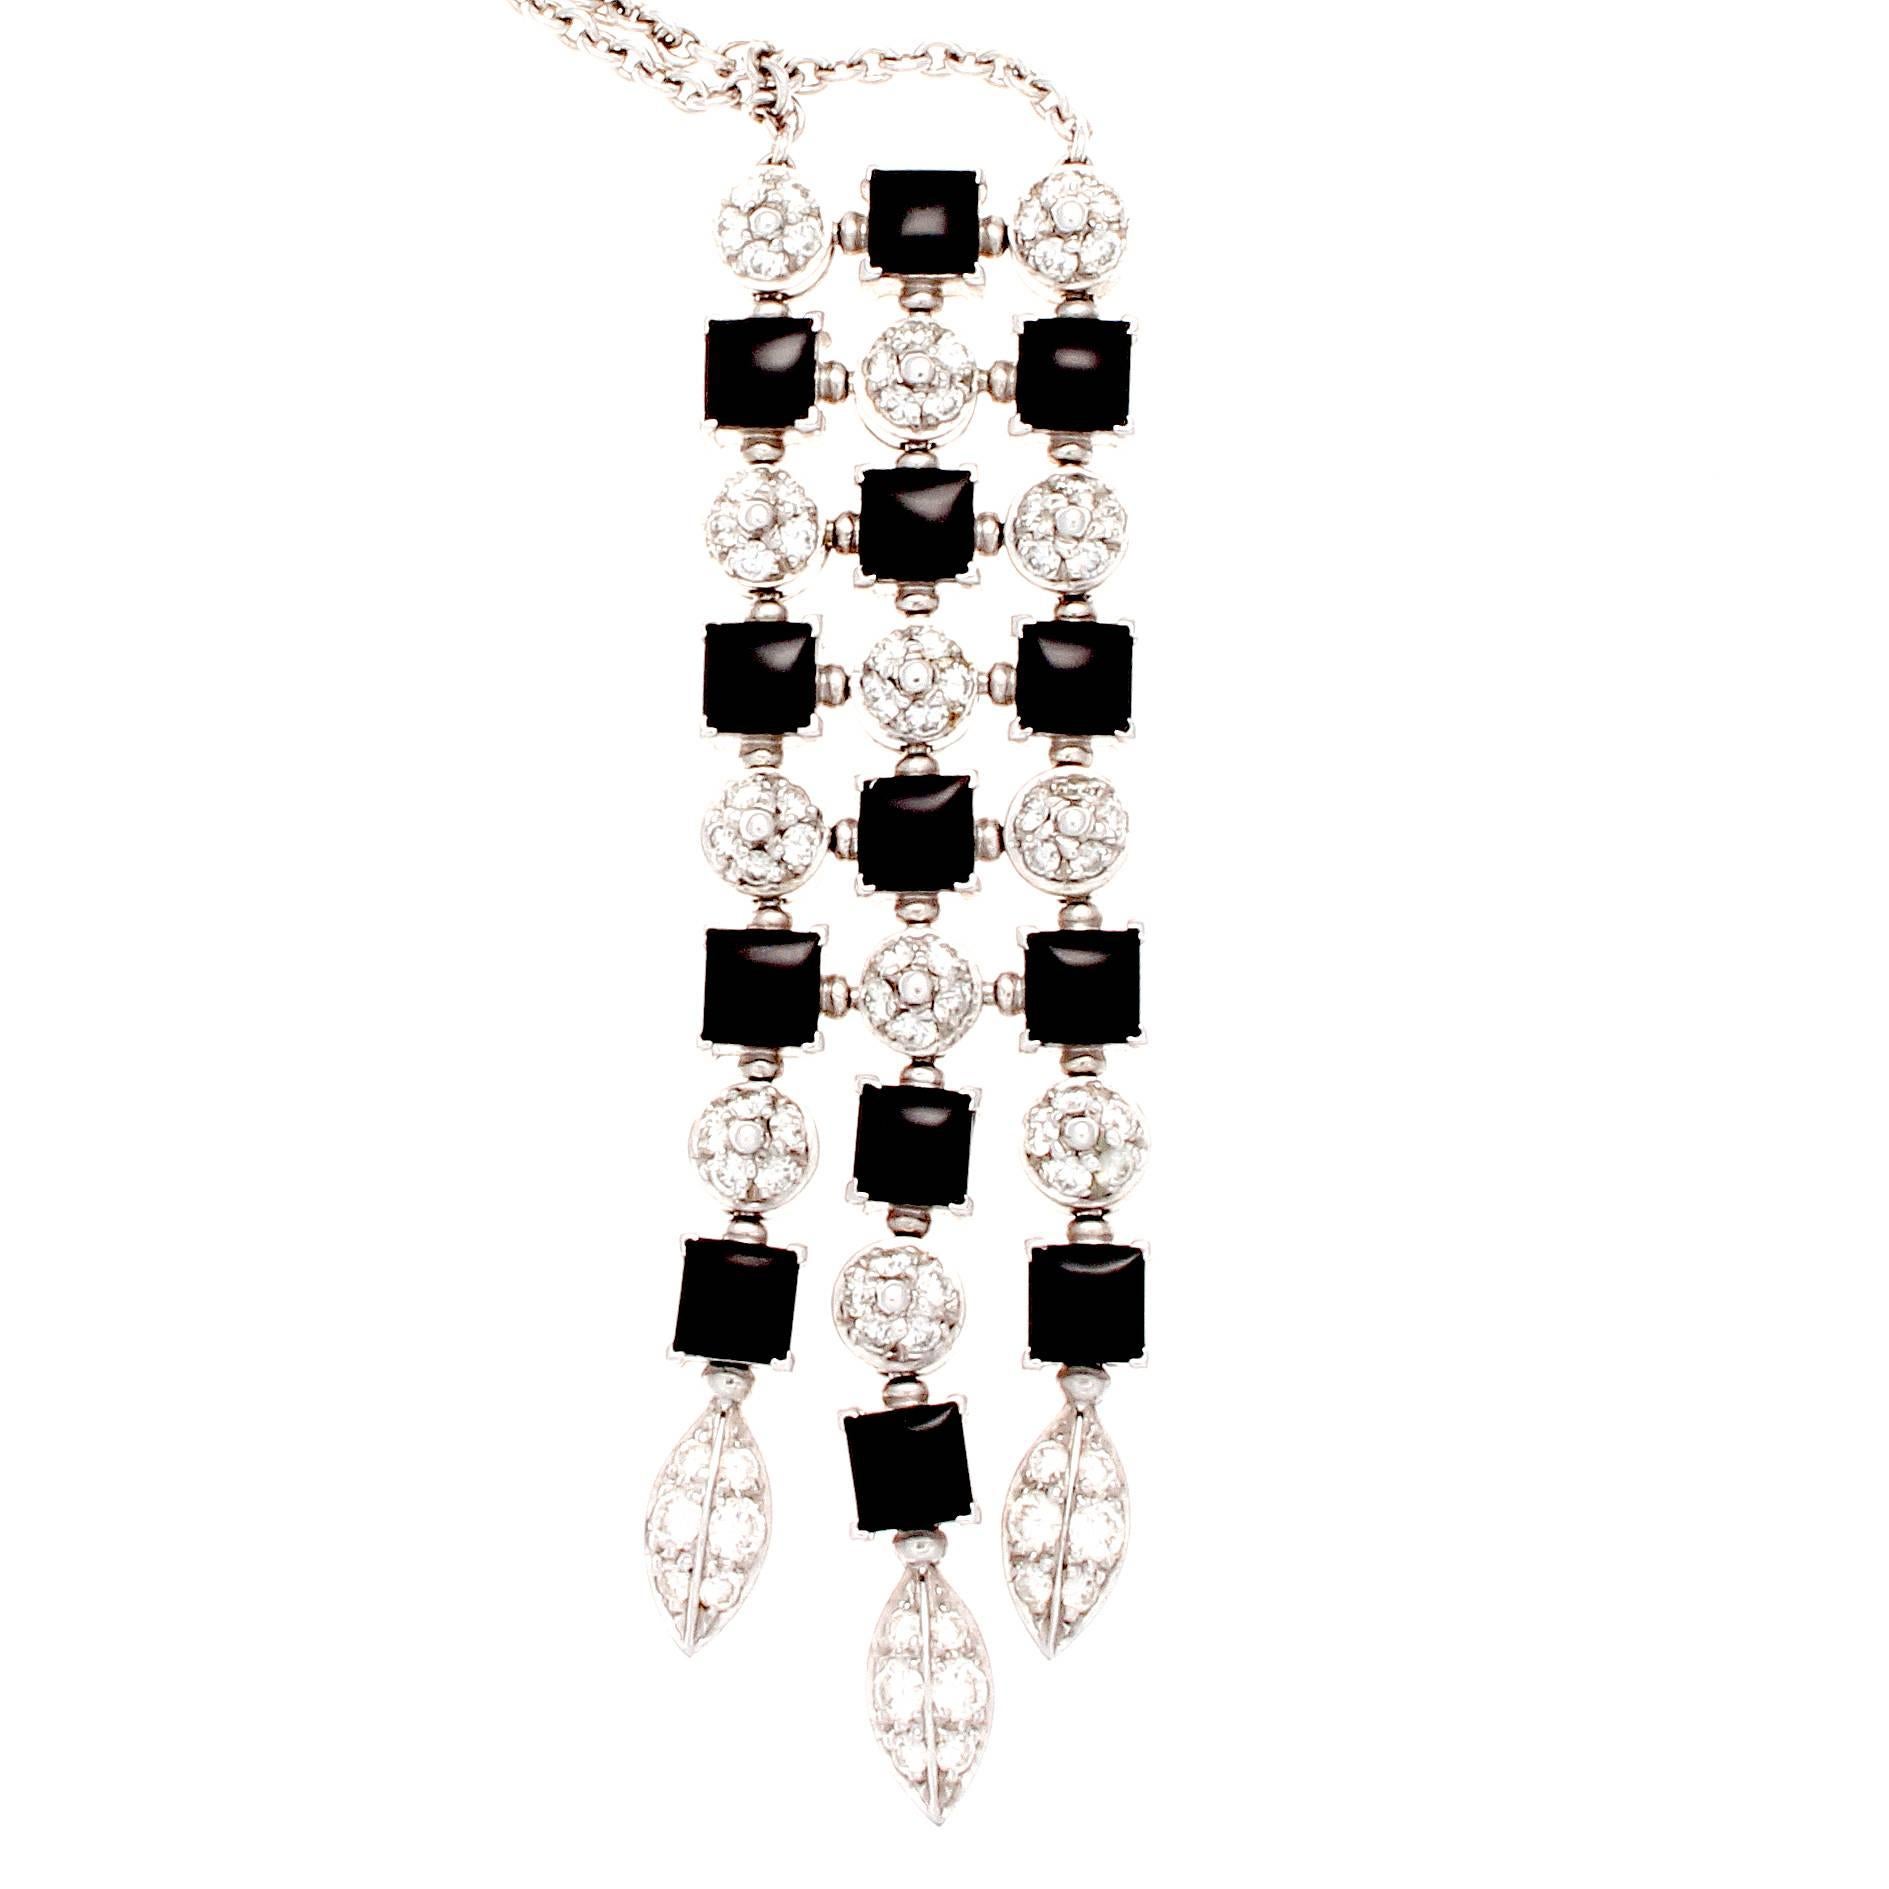 A modernistic creation by the Italian designers at Bulgari. The necklace has been fashioned with alternating shaped of jet black onyx and clean white diamonds. Creatively crafted with 4 beads that grasp the clasp so the necklace can be worn at